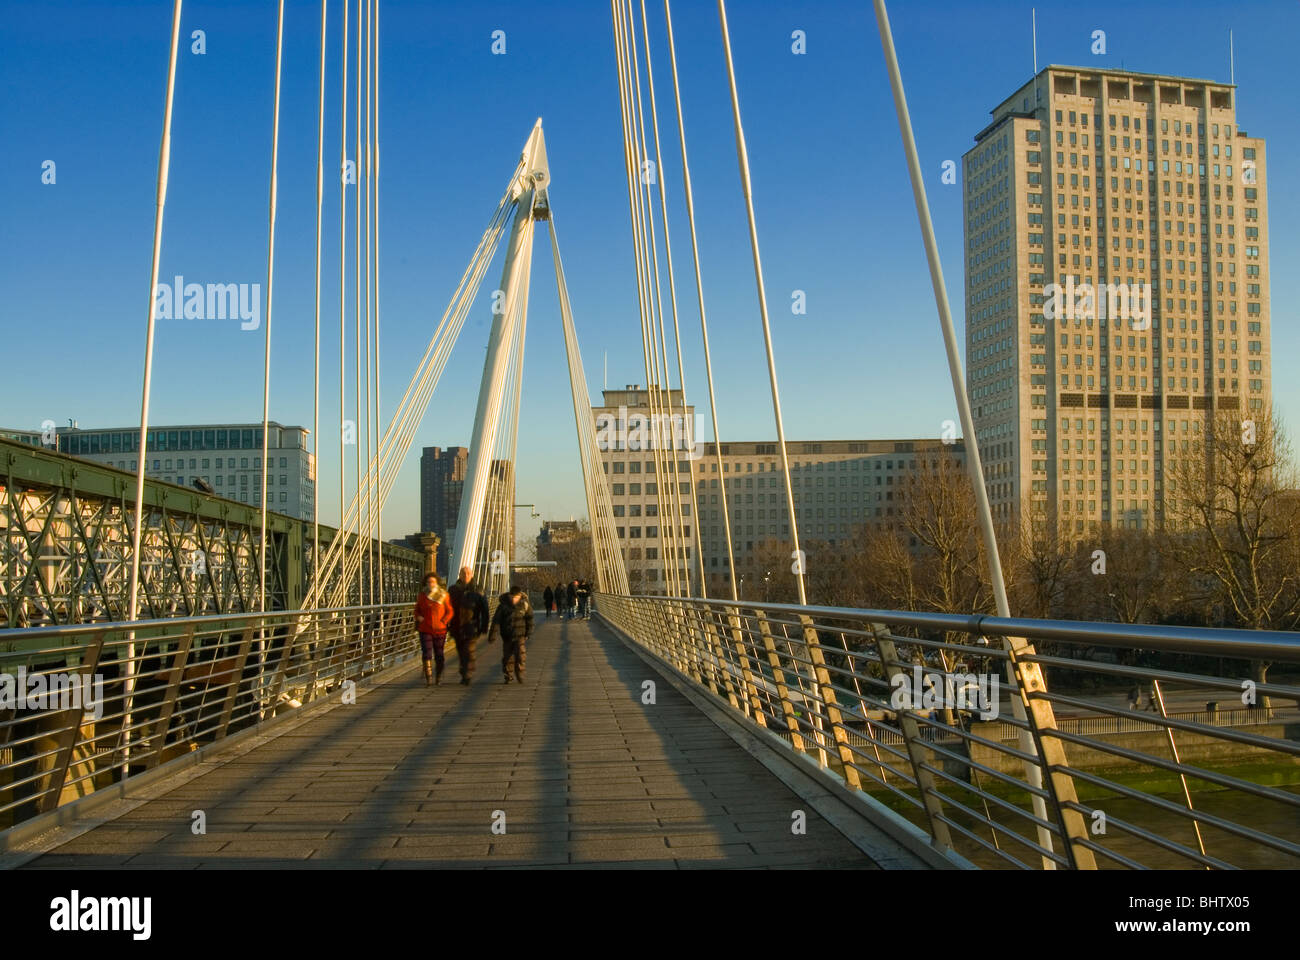 People walking along the Golden Jubilee Bridge in central London with the Shell building in the background. Stock Photo